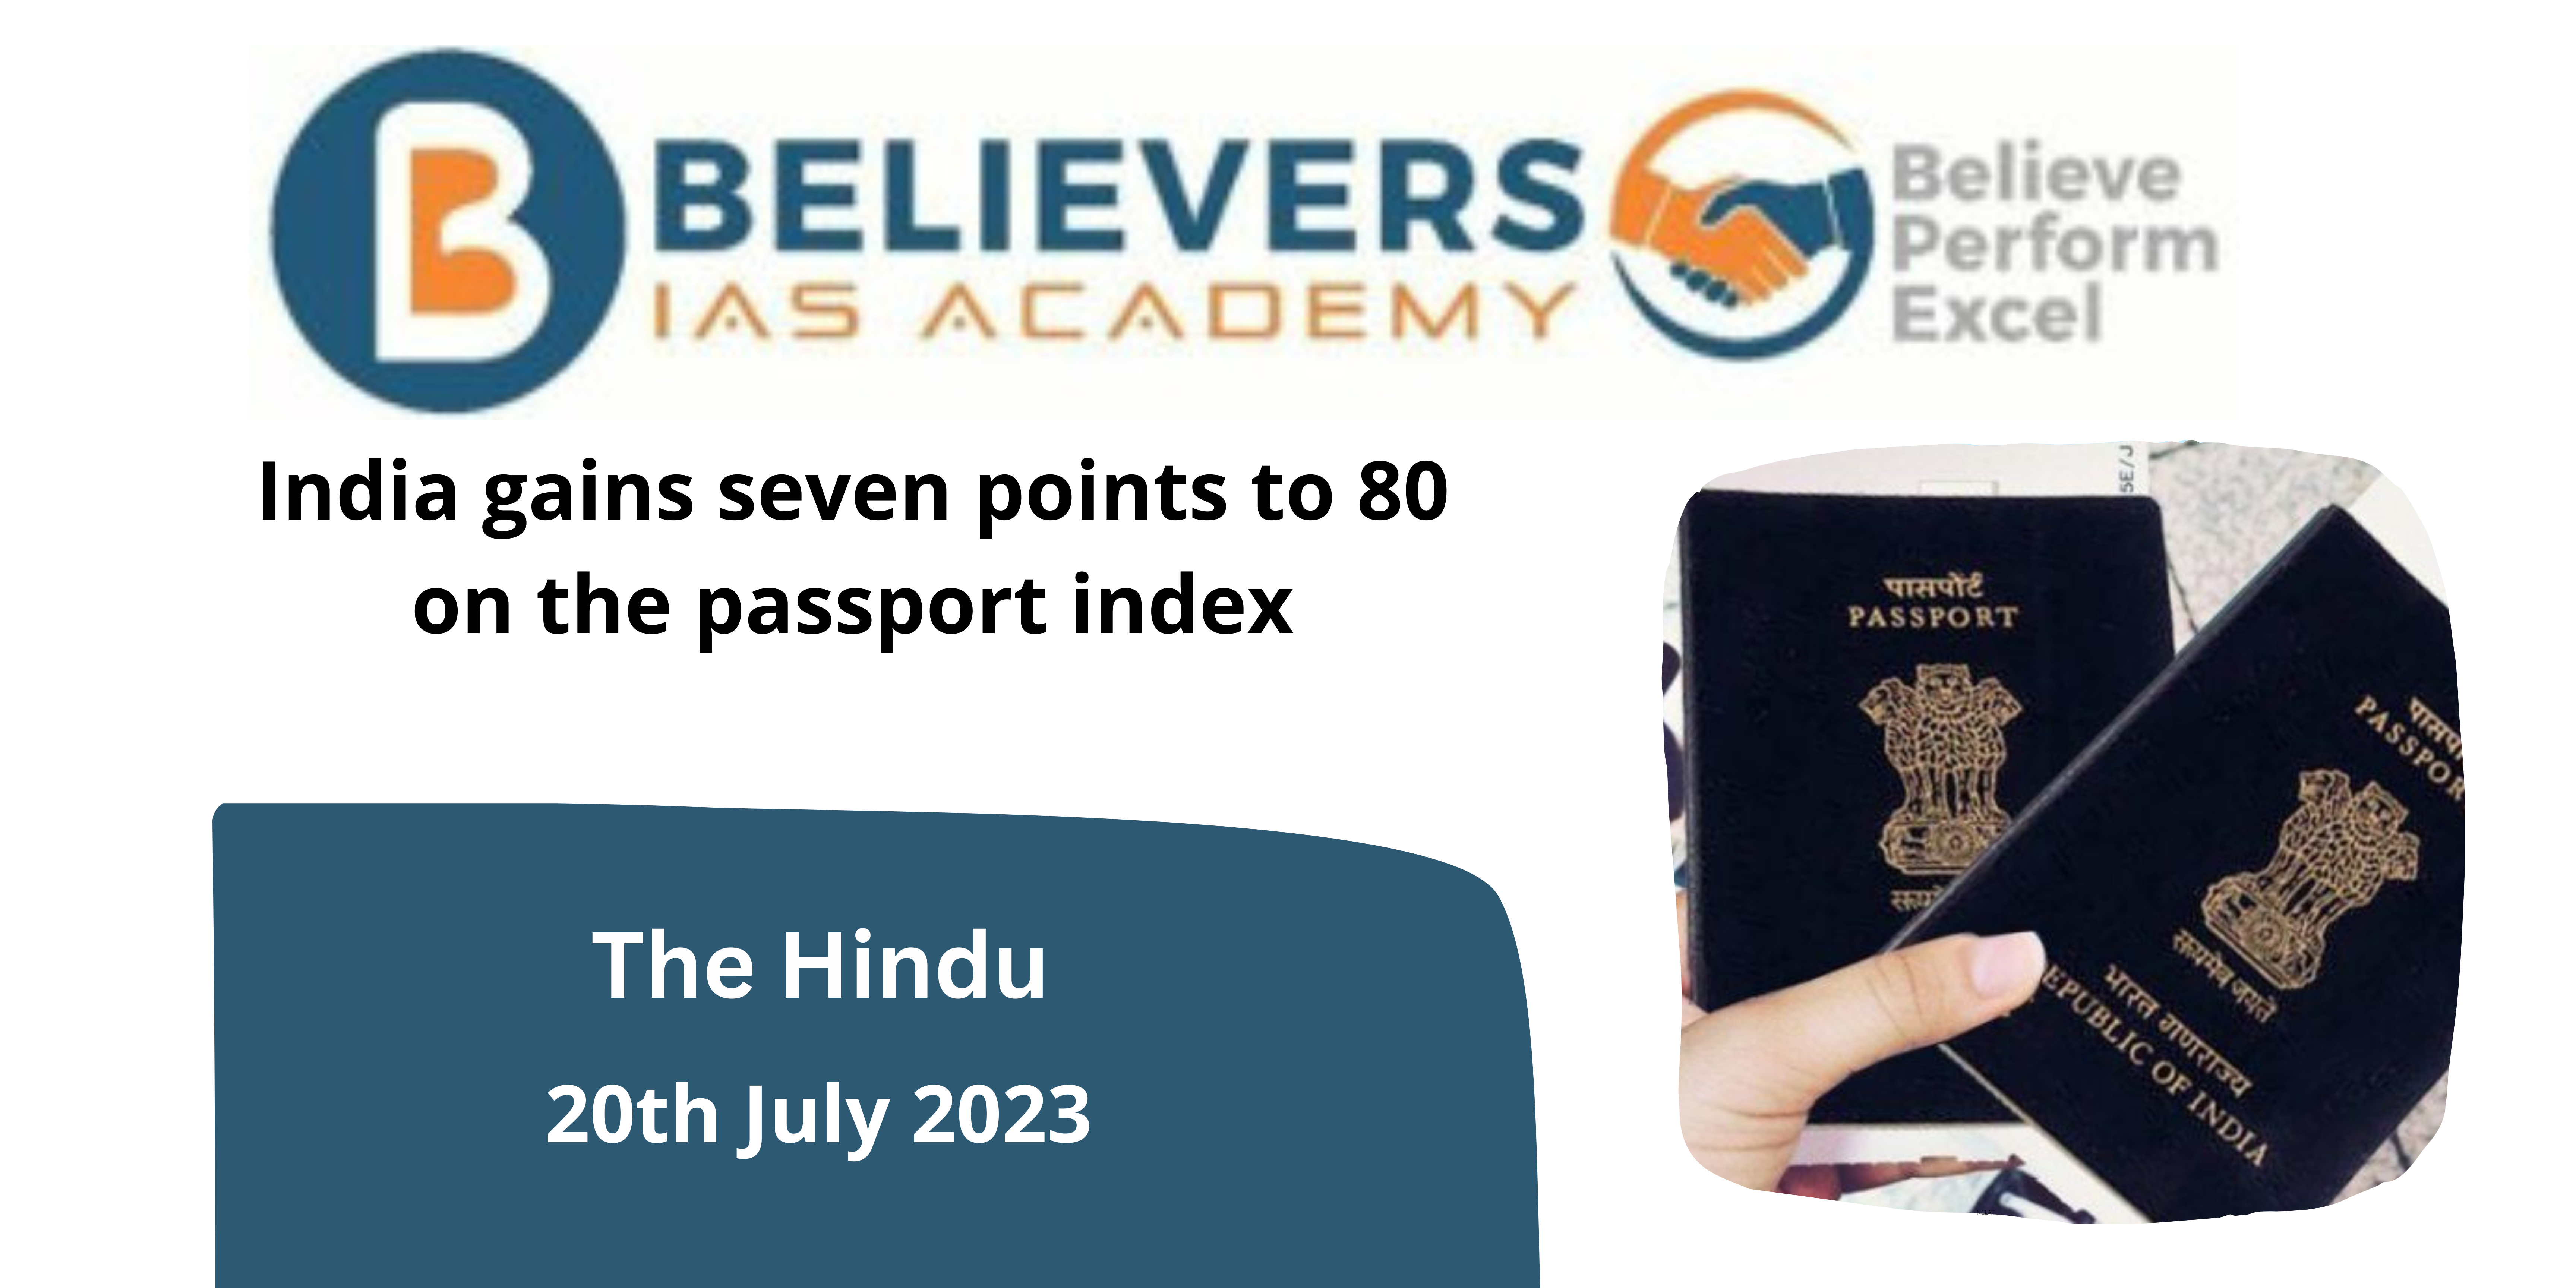 India gains seven points to 80 on the passport index